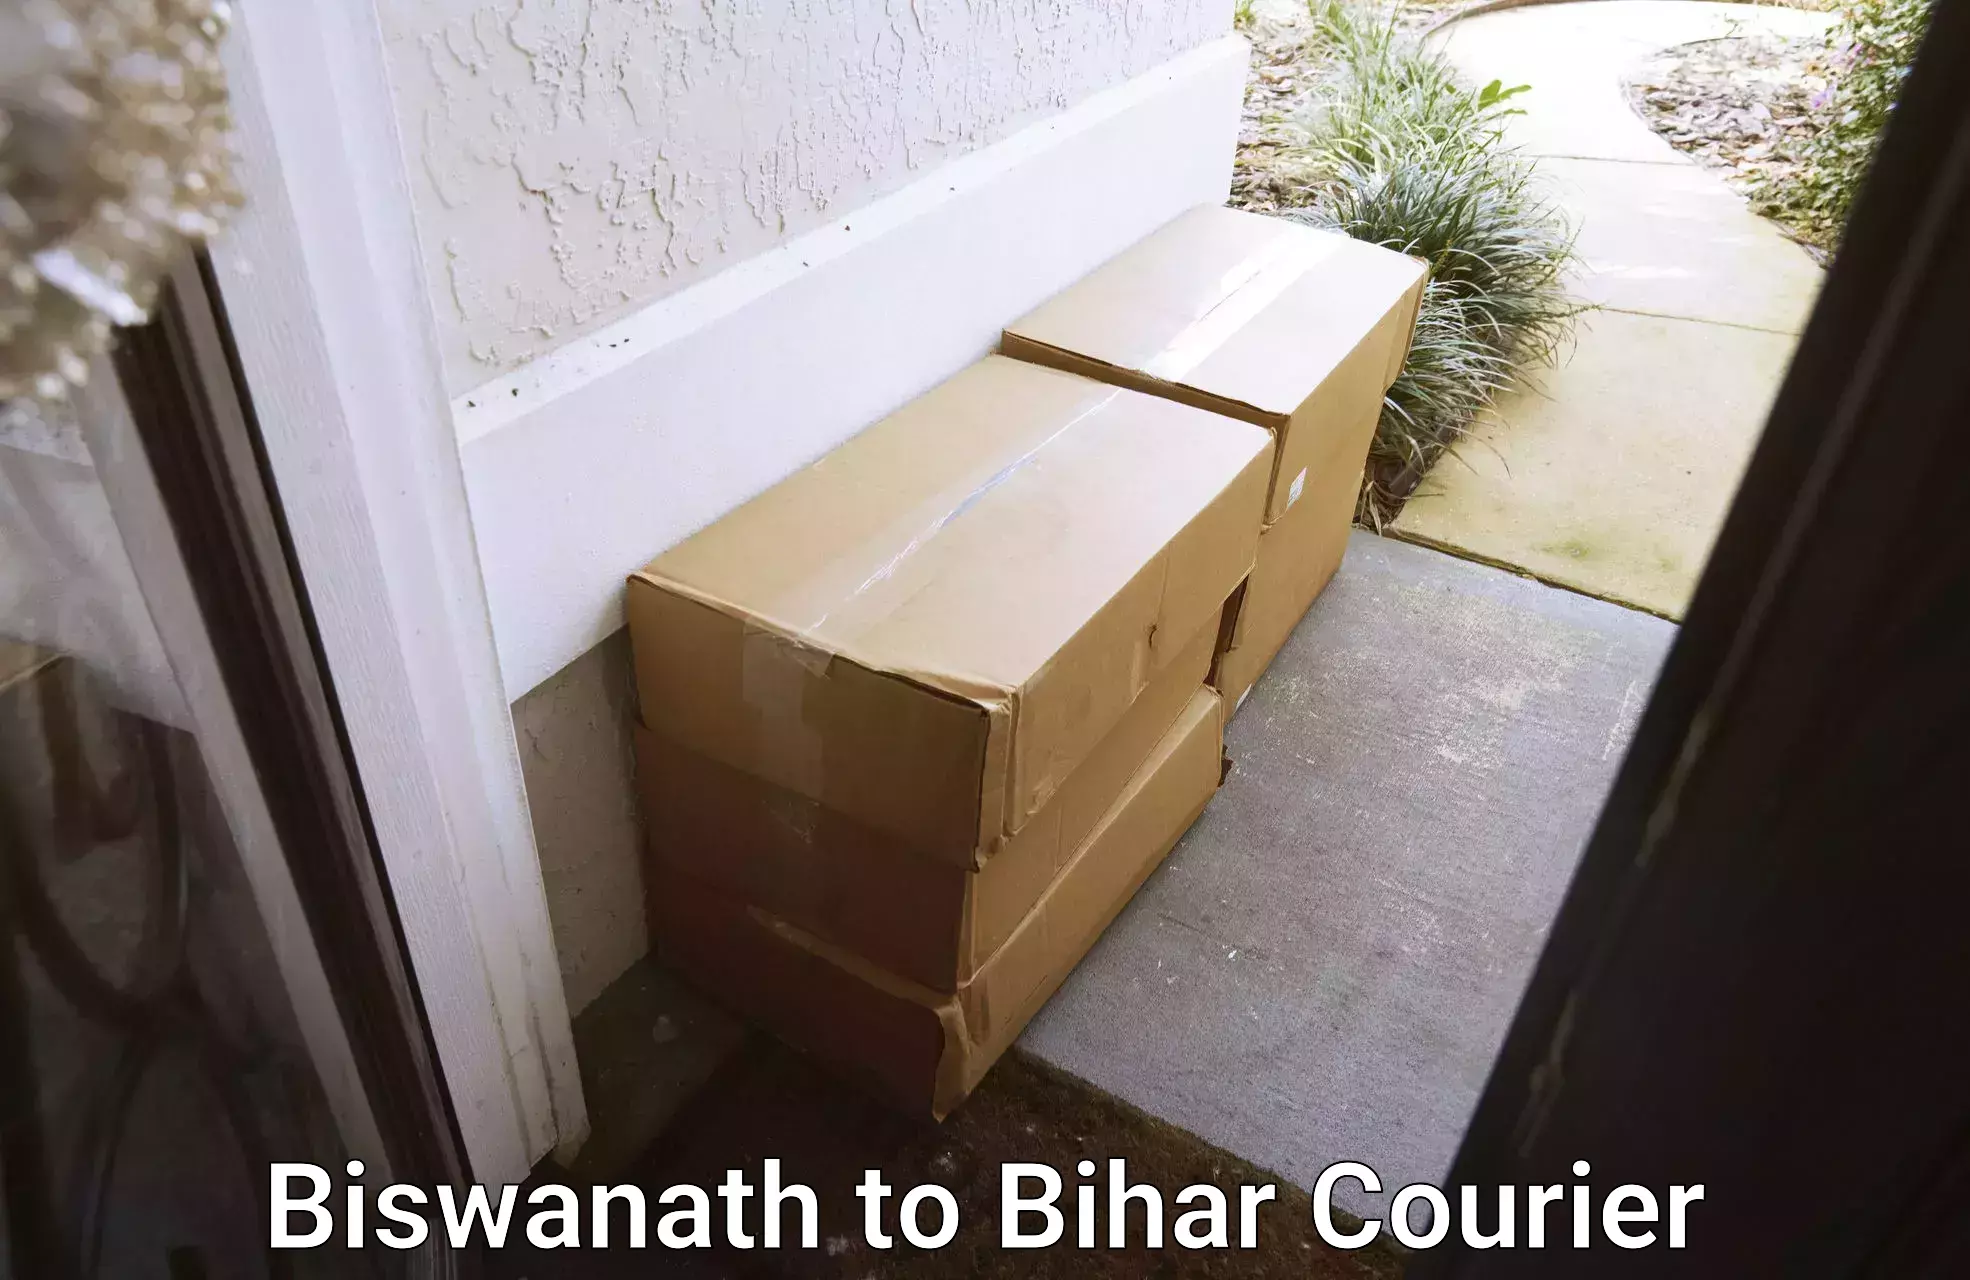 Courier service partnerships Biswanath to Bakhri